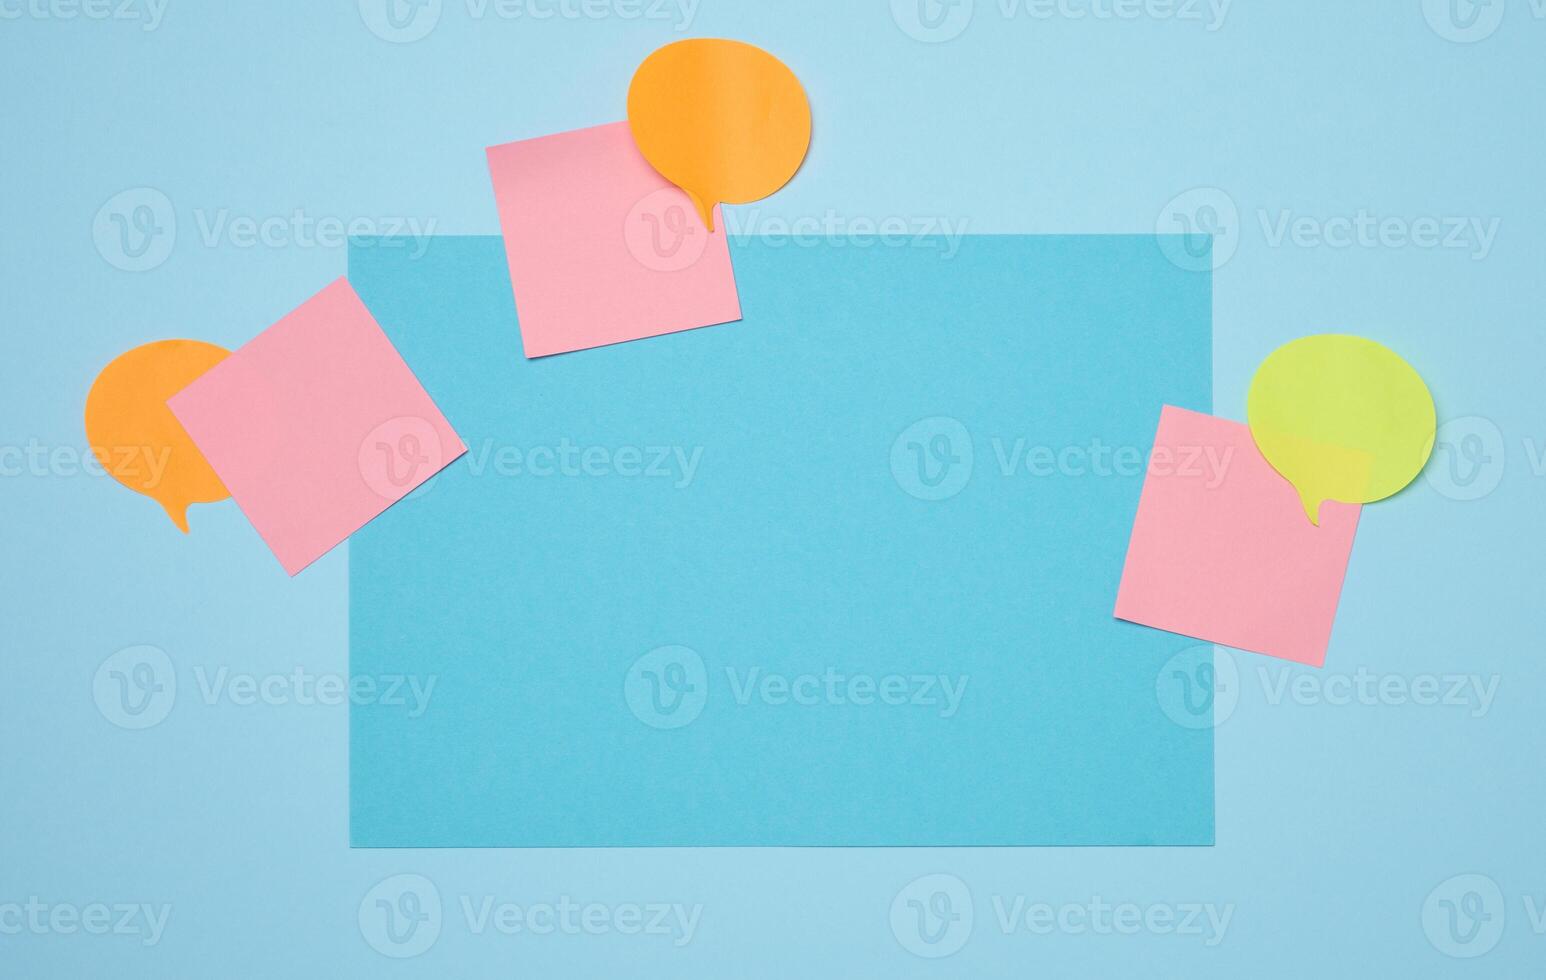 Blank rectangular sheet of paper on a blue background photo